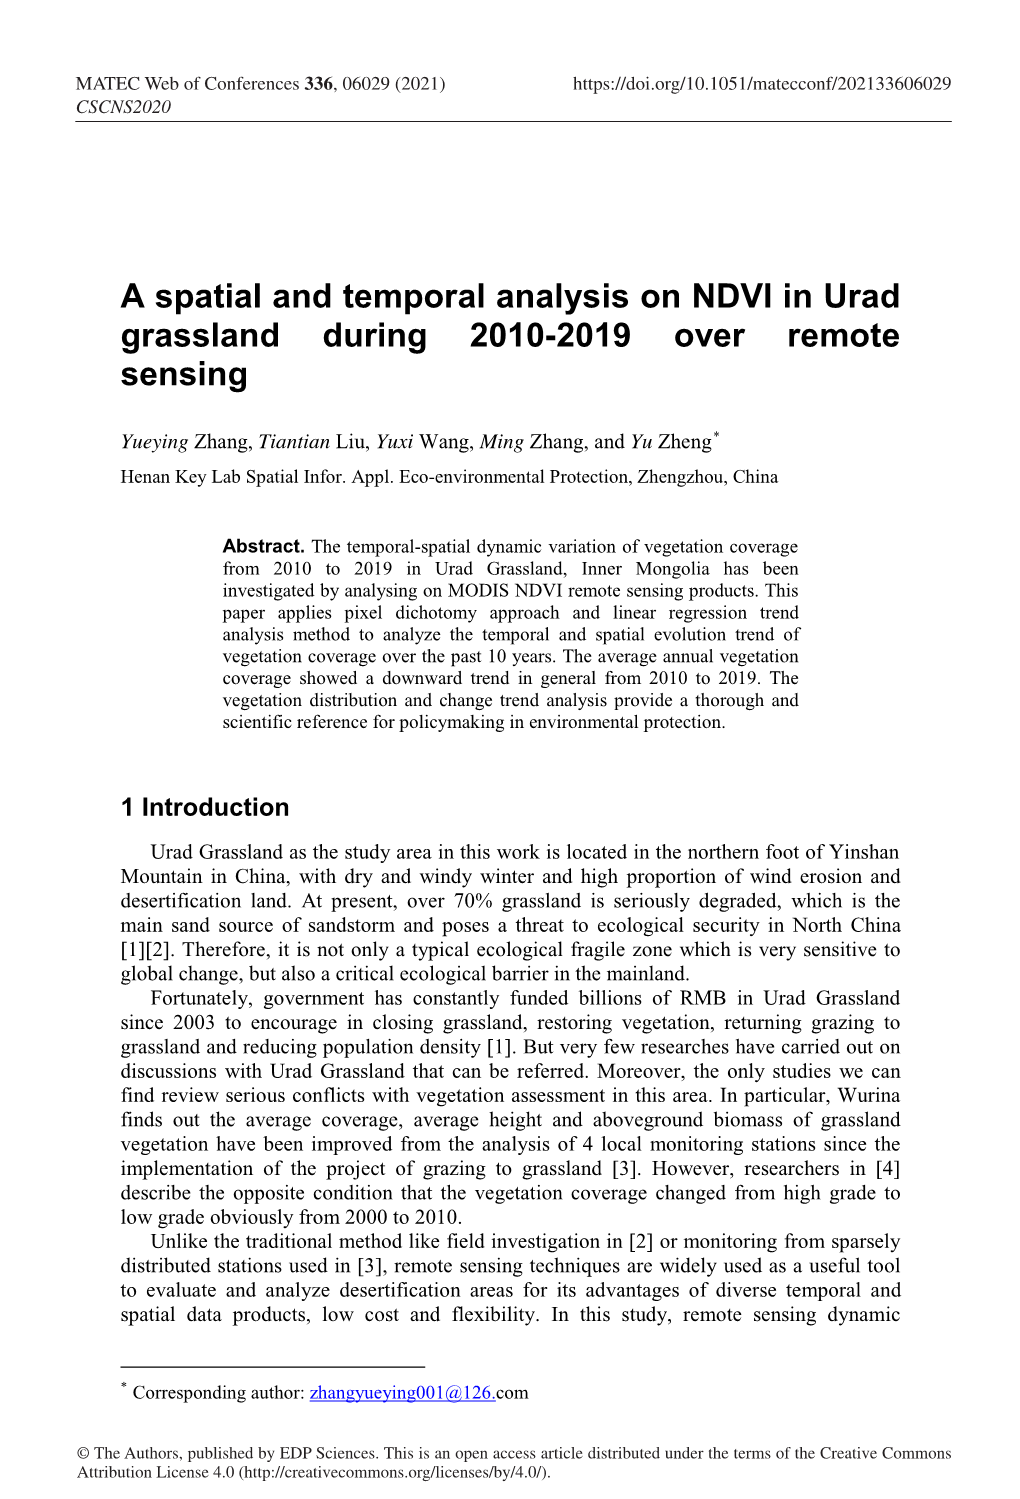 A Spatial and Temporal Analysis on NDVI in Urad Grassland During 2010-2019 Over Remote Sensing